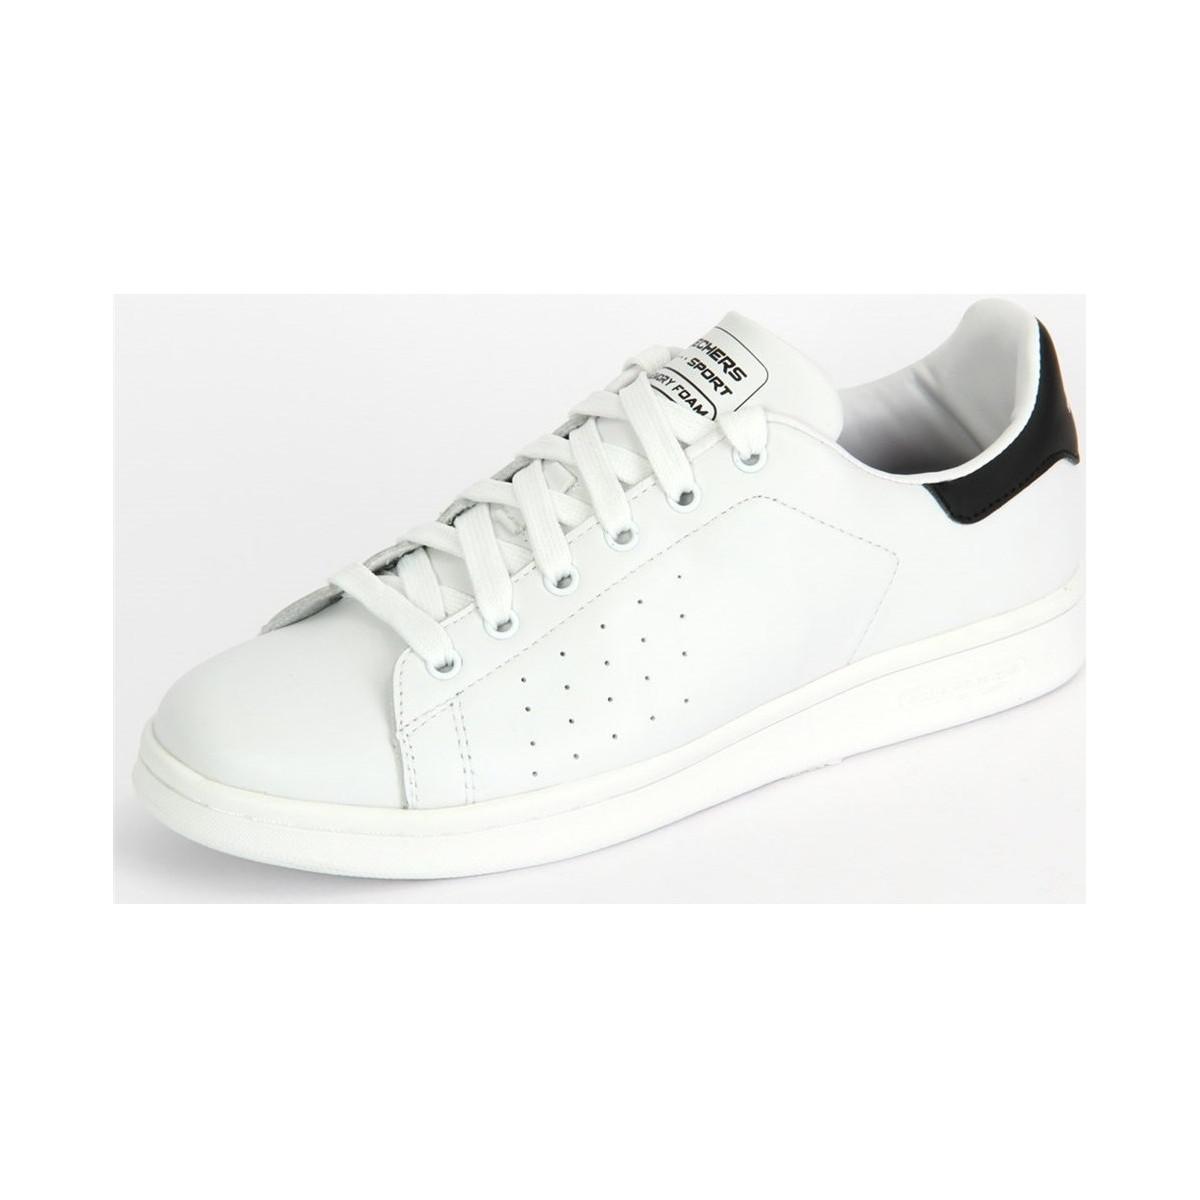 skechers white leather shoes Online 